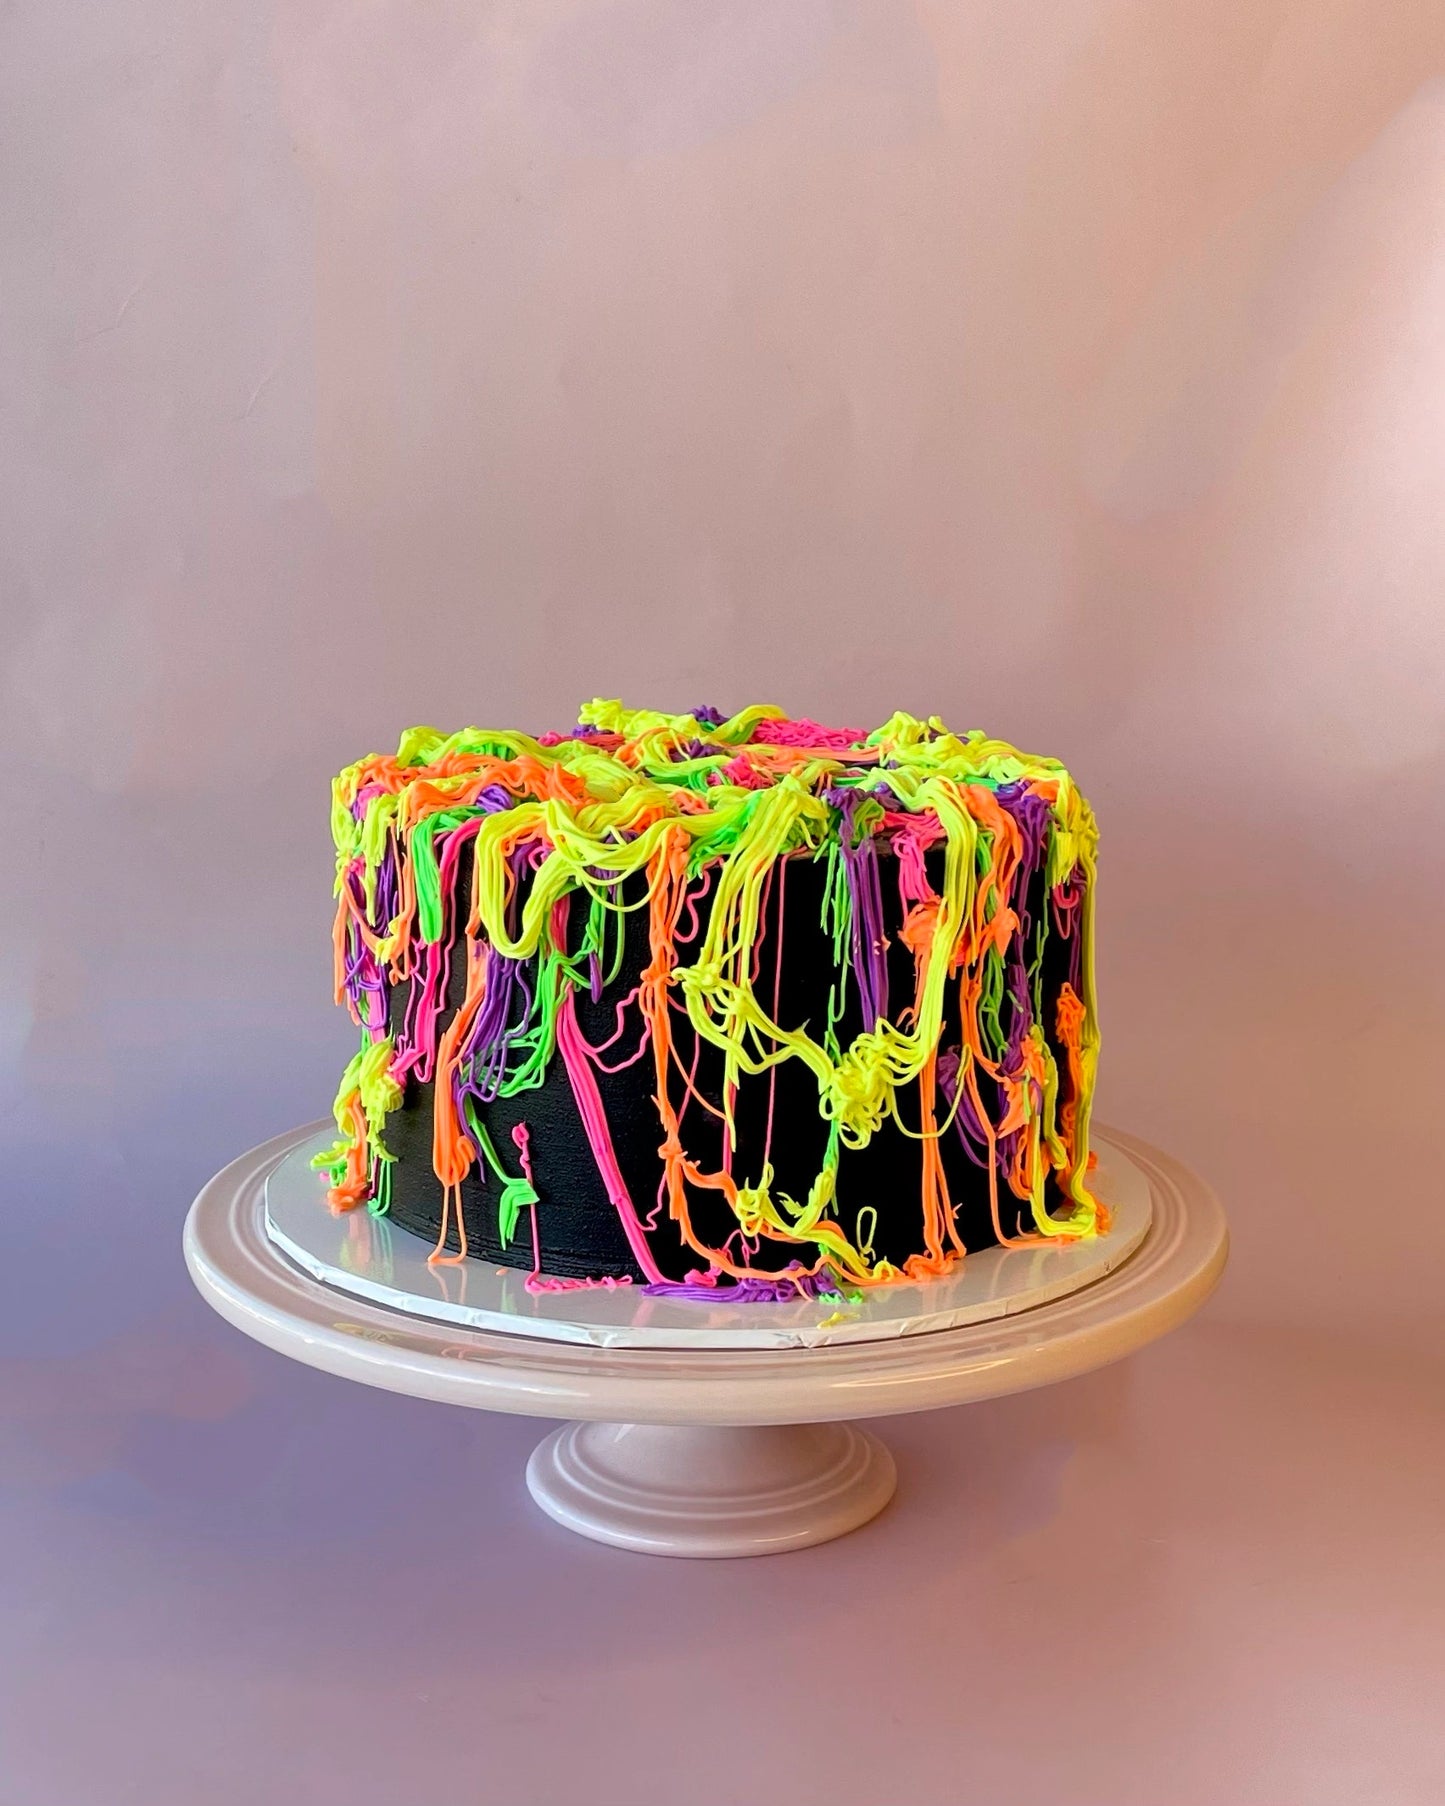 Neon Messy Birthday Cake-bannos cakes-sydney delivery